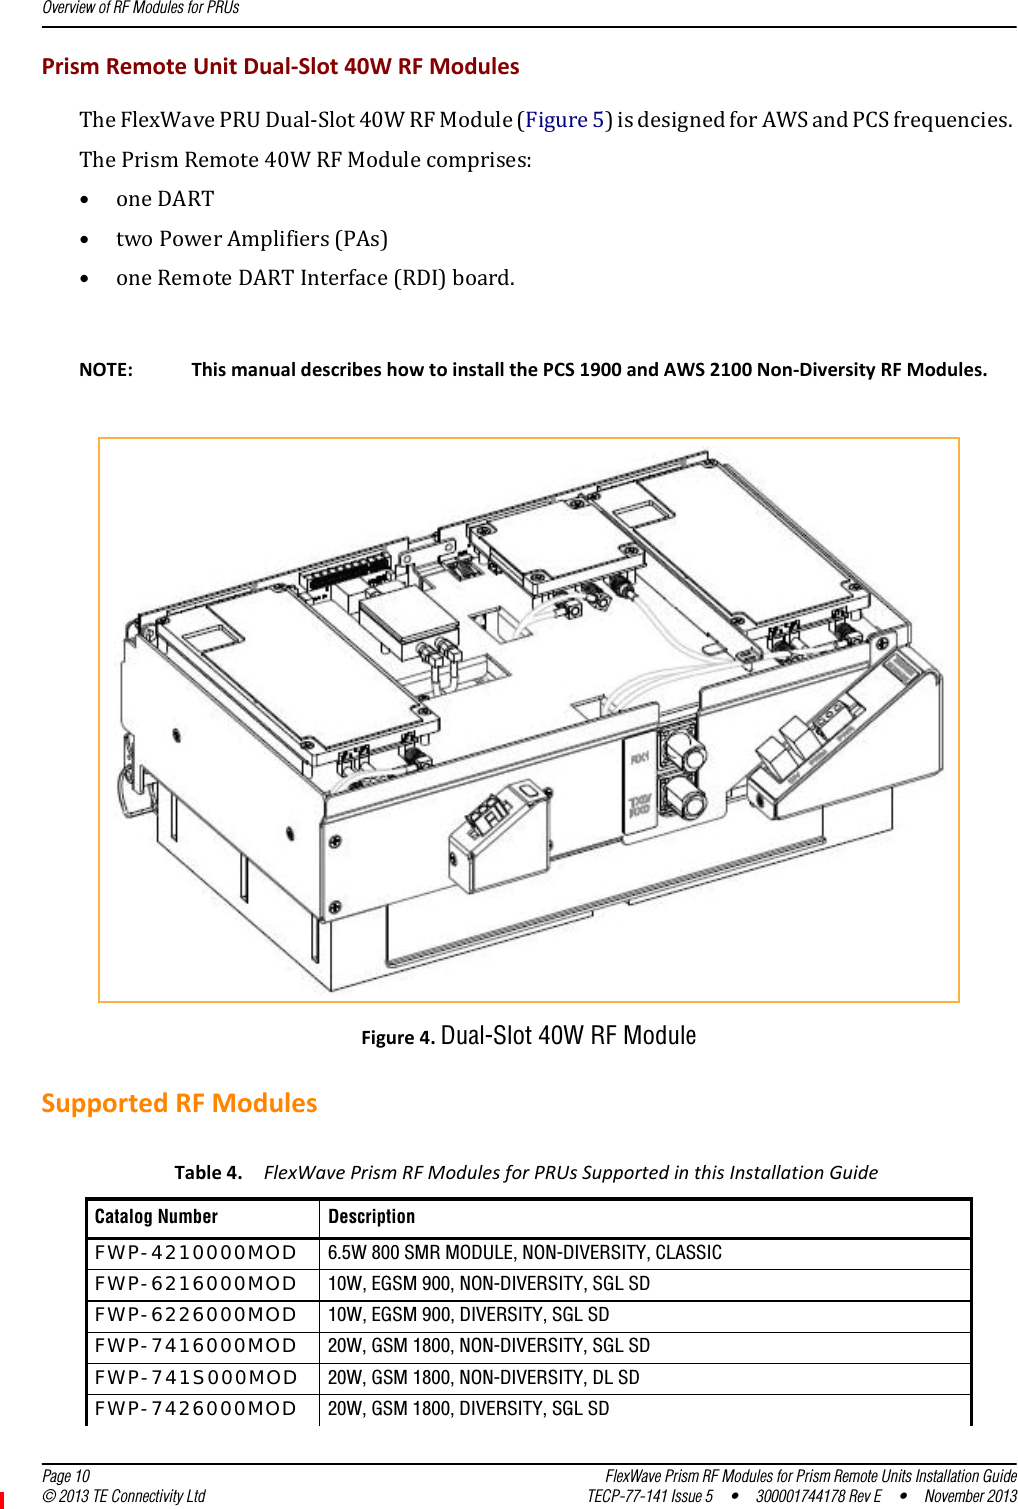 Overview of RF Modules for PRUs  Page 10 FlexWave Prism RF Modules for Prism Remote Units Installation Guide© 2013 TE Connectivity Ltd TECP-77-141 Issue 5  •  300001744178 Rev E  •  November 2013PrismRemoteUnitDual‐Slot40WRFModulesTheFlexWavePRUDual‐Slot40WRFModule(Figure5)isdesignedforAWSandPCSfrequencies.ThePrismRemote40WRFModulecomprises:•oneDART•twoPowerAmplifiers(PAs)•oneRemoteDARTInterface(RDI)board.NOTE: ThismanualdescribeshowtoinstallthePCS1900andAWS2100Non‐DiversityRFModules.Figure4.Dual-Slot 40W RF ModuleSupportedRFModulesTable4.FlexWavePrismRFModulesforPRUsSupportedinthisInstallationGuideCatalog Number DescriptionFWP-4210000MOD 6.5W 800 SMR MODULE, NON-DIVERSITY, CLASSIC FWP-6216000MOD 10W, EGSM 900, NON-DIVERSITY, SGL SD FWP-6226000MOD 10W, EGSM 900, DIVERSITY, SGL SD FWP-7416000MOD 20W, GSM 1800, NON-DIVERSITY, SGL SD FWP-741S000MOD 20W, GSM 1800, NON-DIVERSITY, DL SD FWP-7426000MOD 20W, GSM 1800, DIVERSITY, SGL SD 